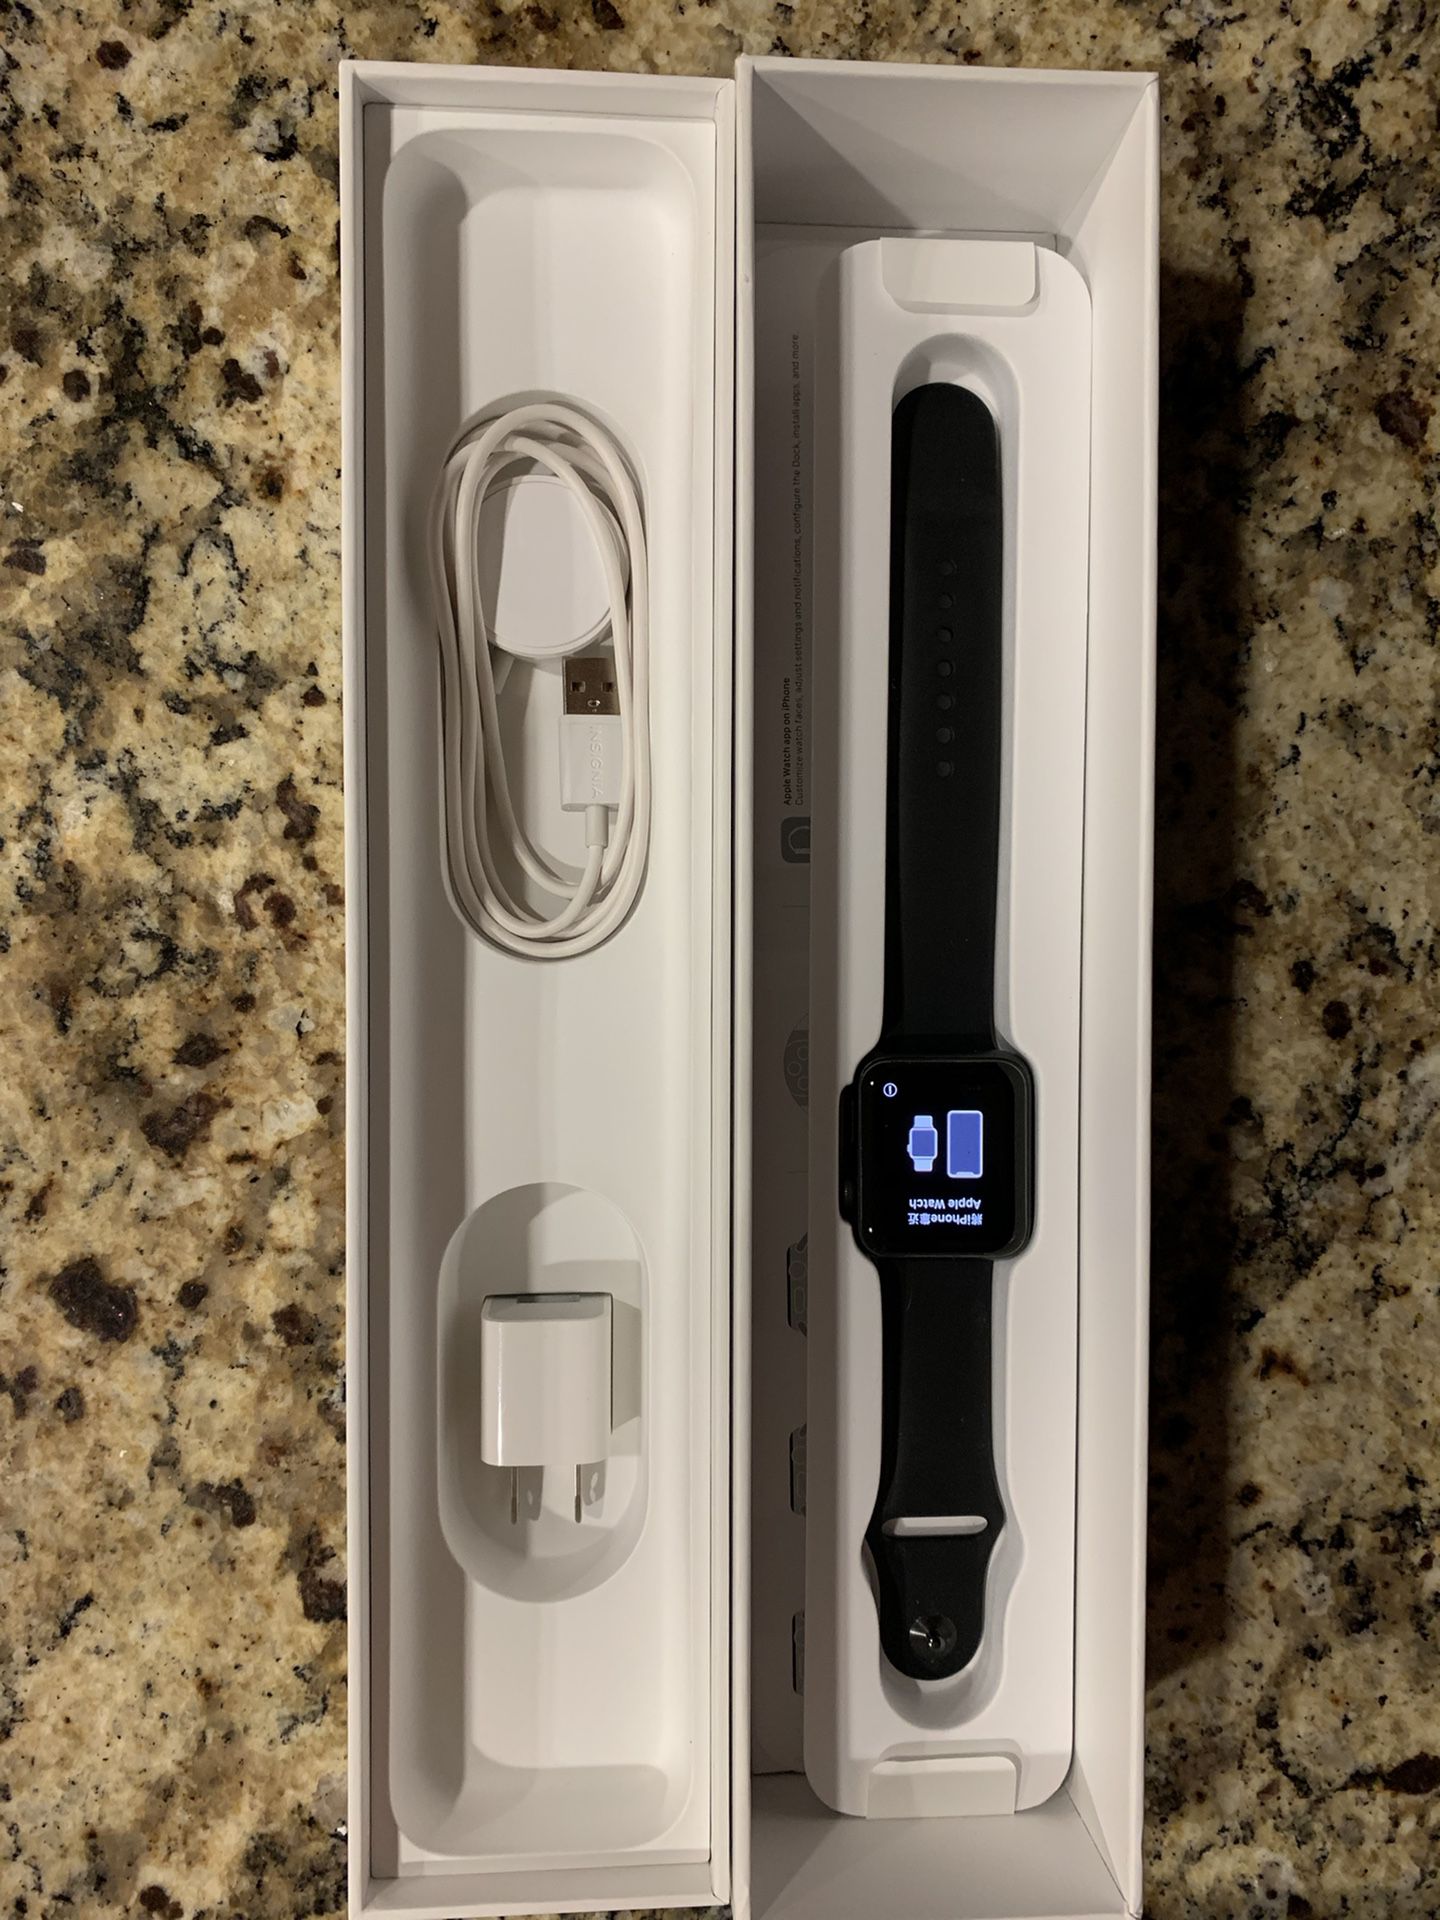 42 mm Apple Watch Series 3 GPS + Cellular, with accessories